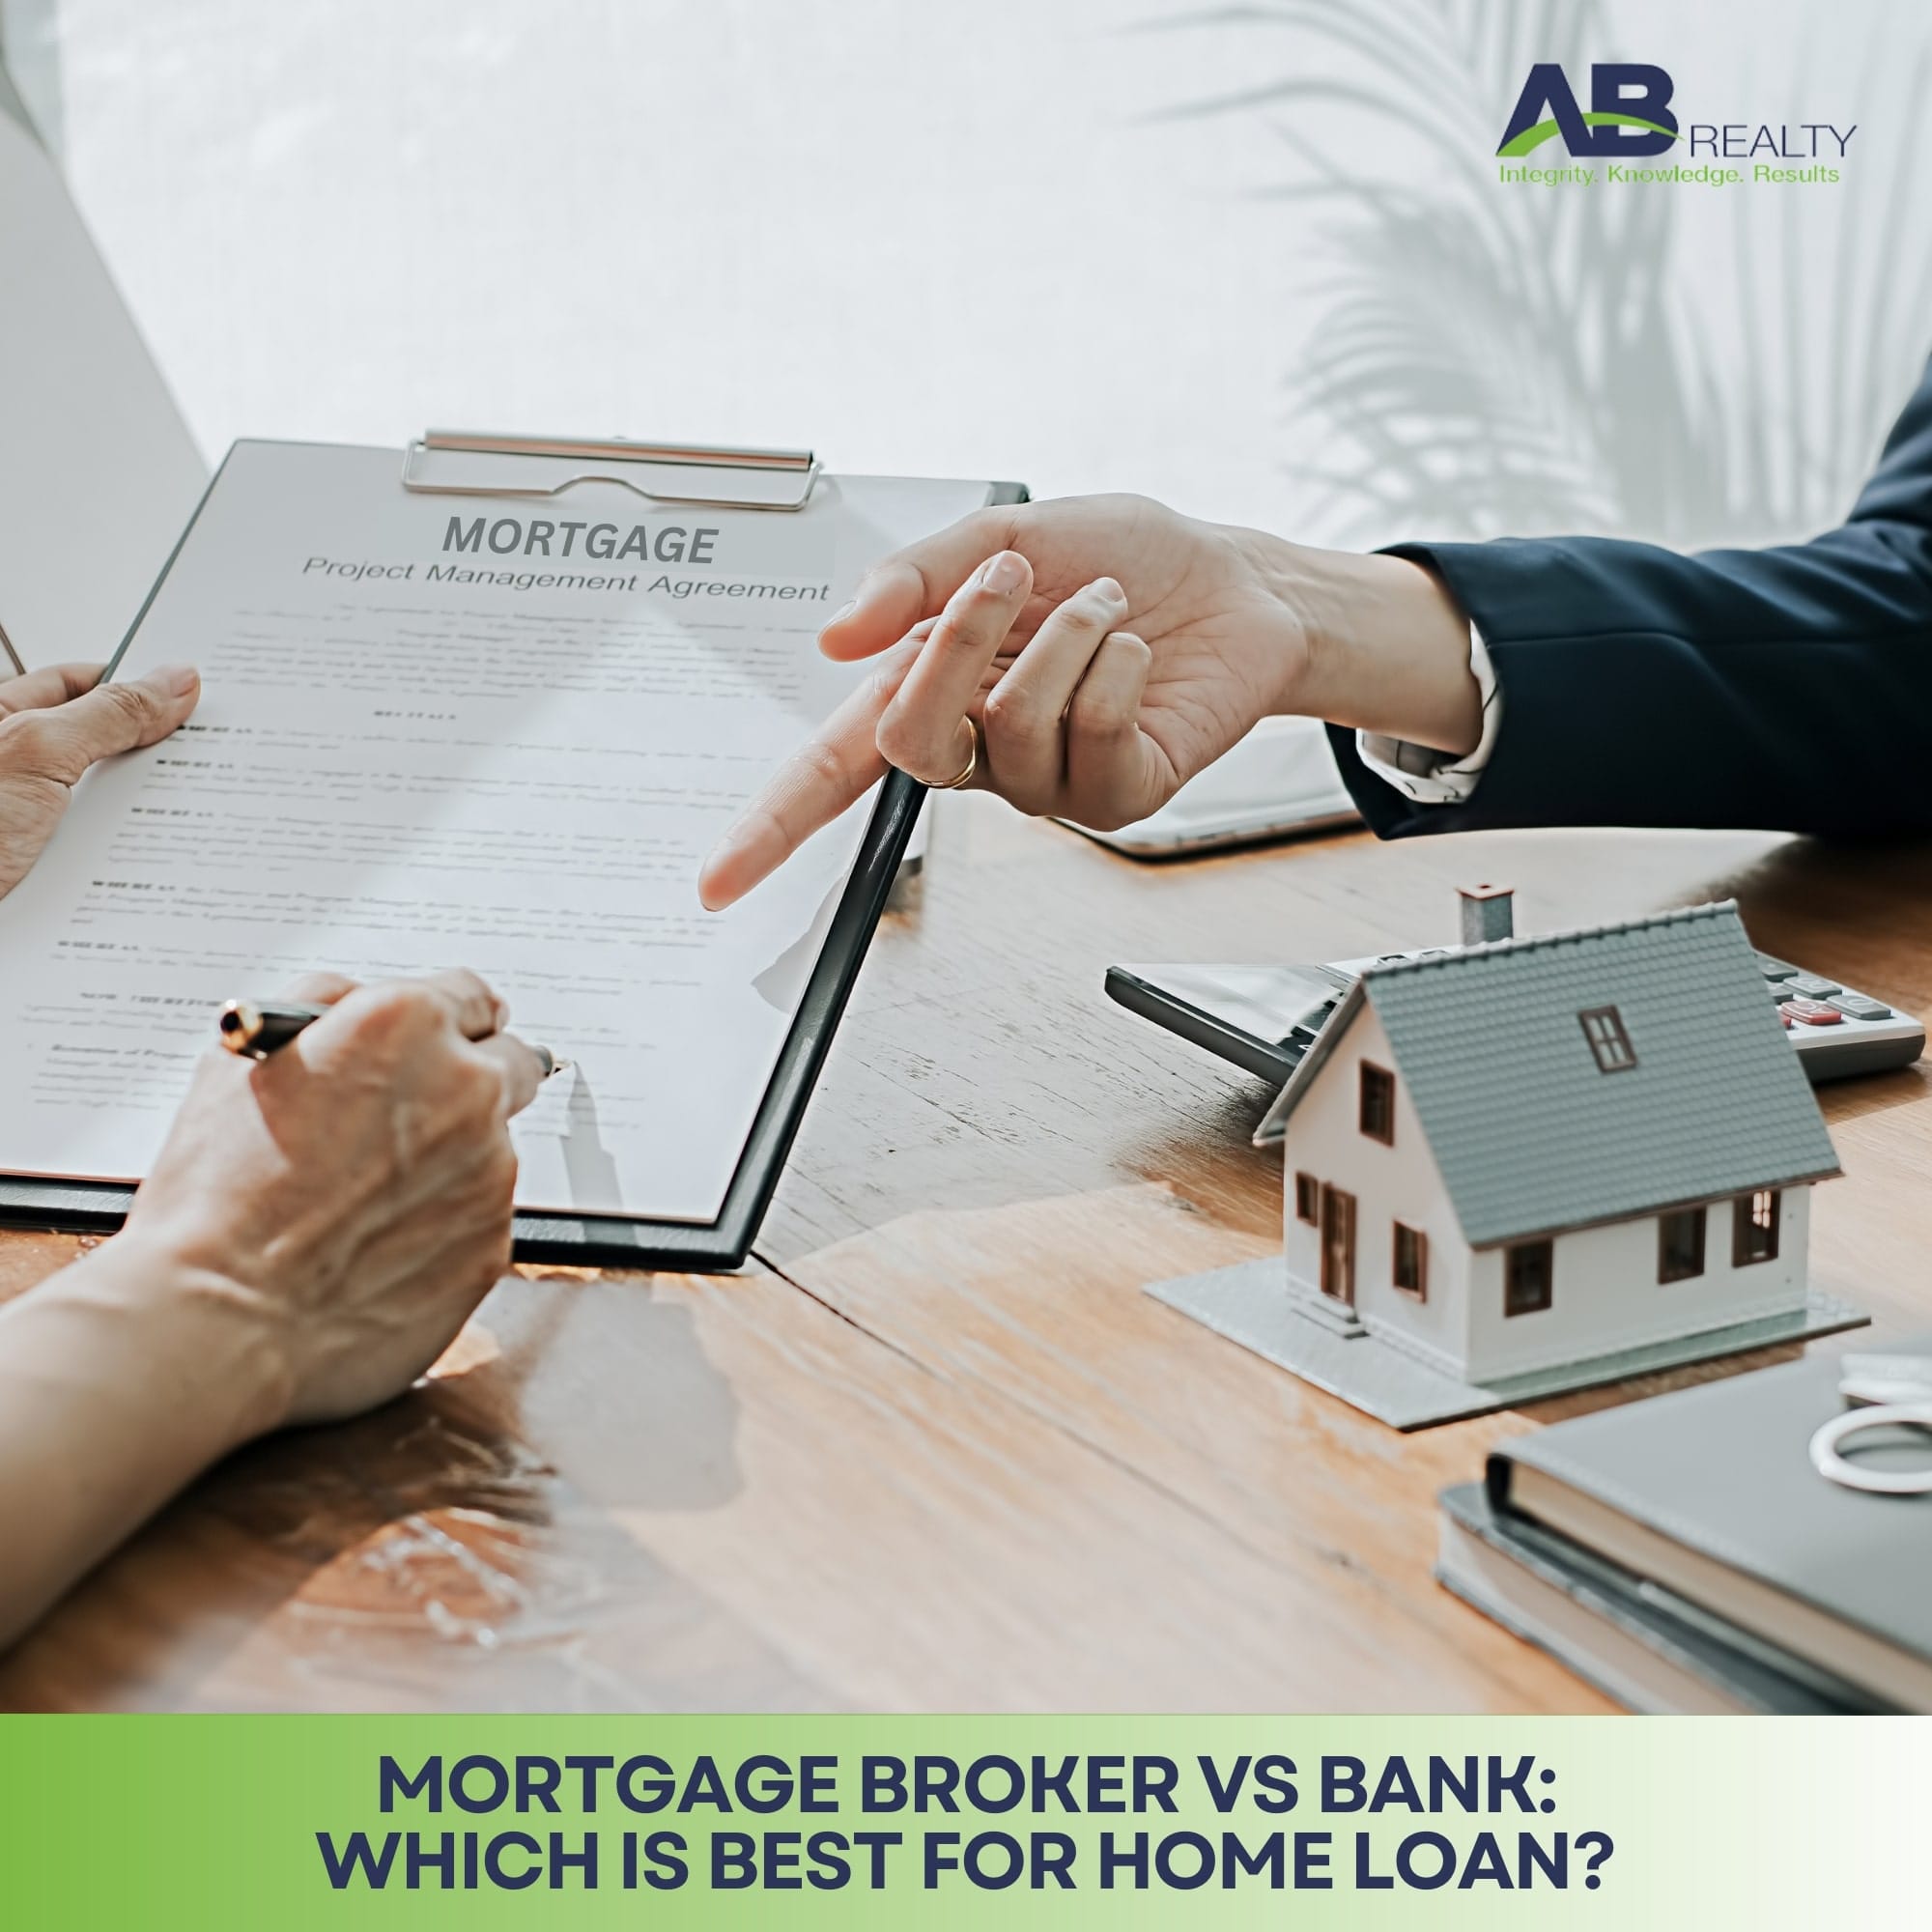 Mortgage Broker vs Bank for Home Loan - which is better?